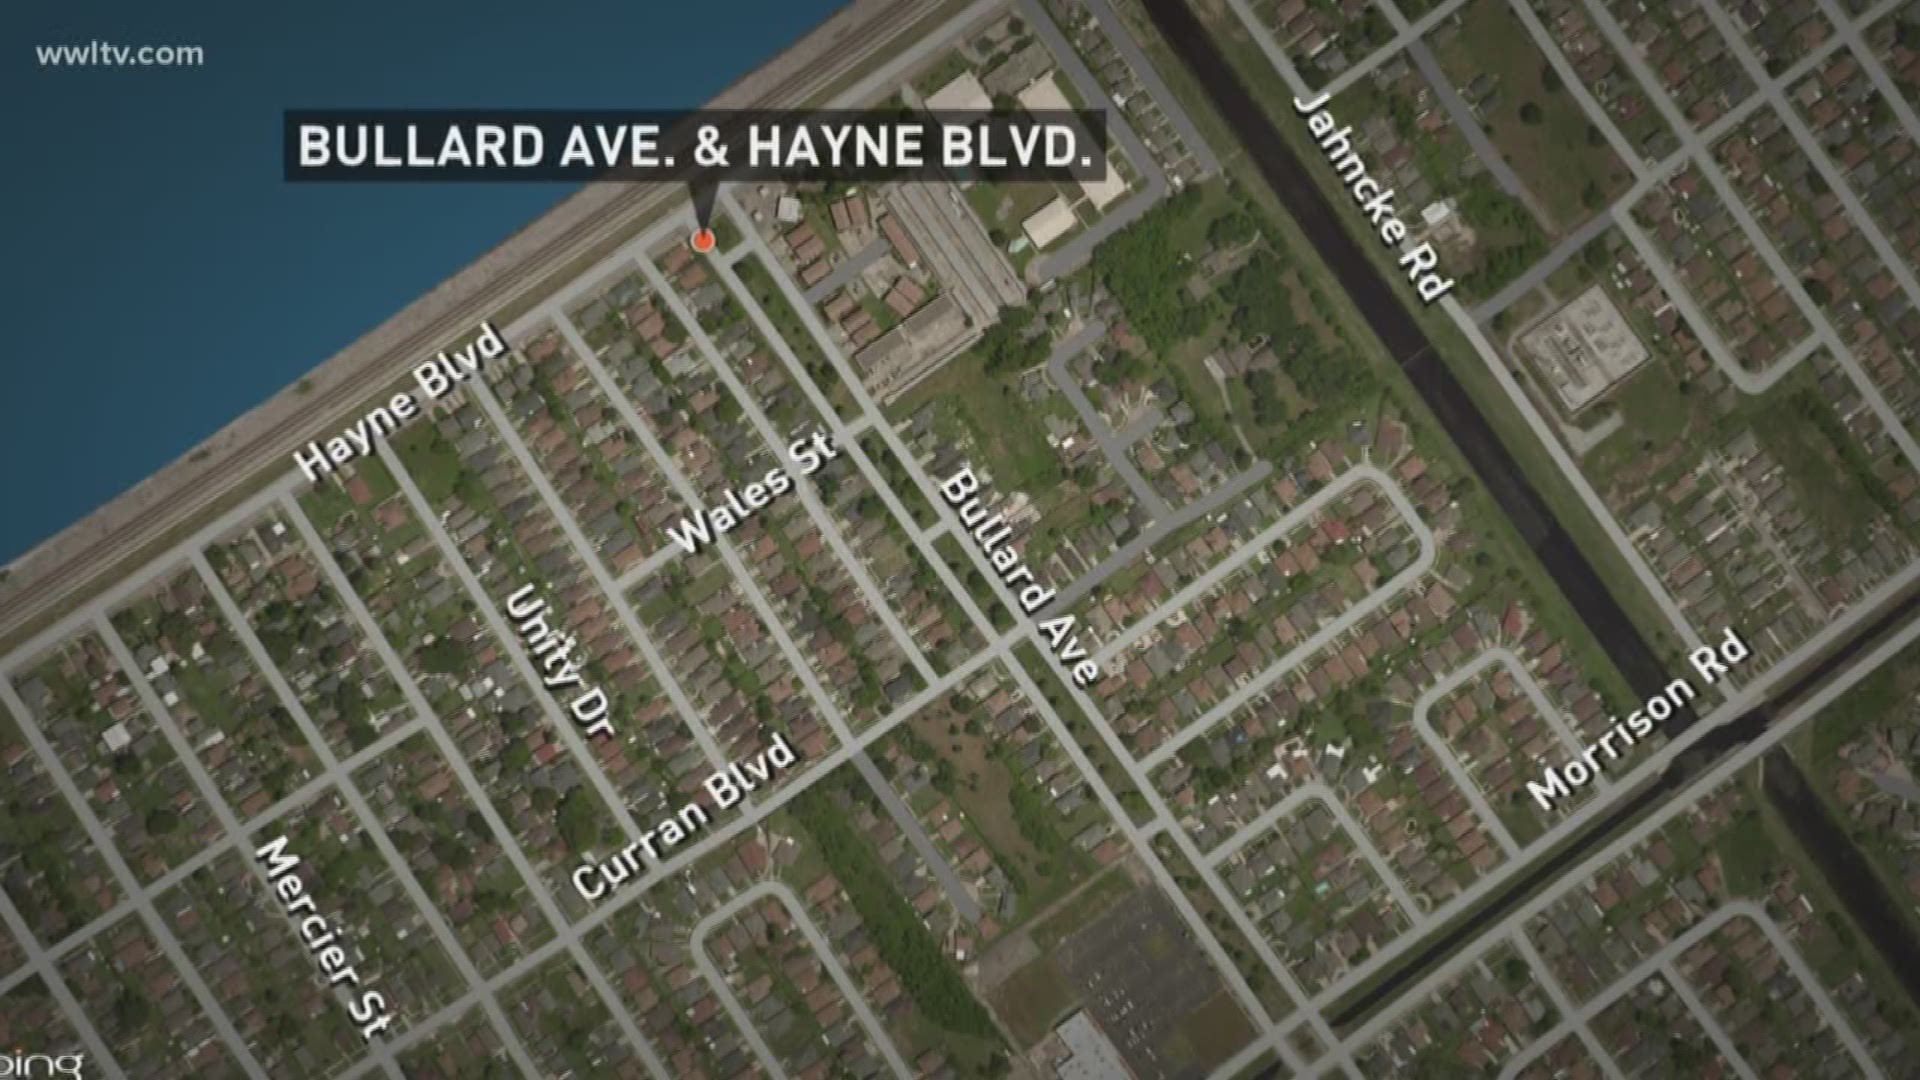 According to the New Orleans Police Department, the shooting happened around 12:39 a.m. near Bullard Avenue and Hayne Boulevard. 